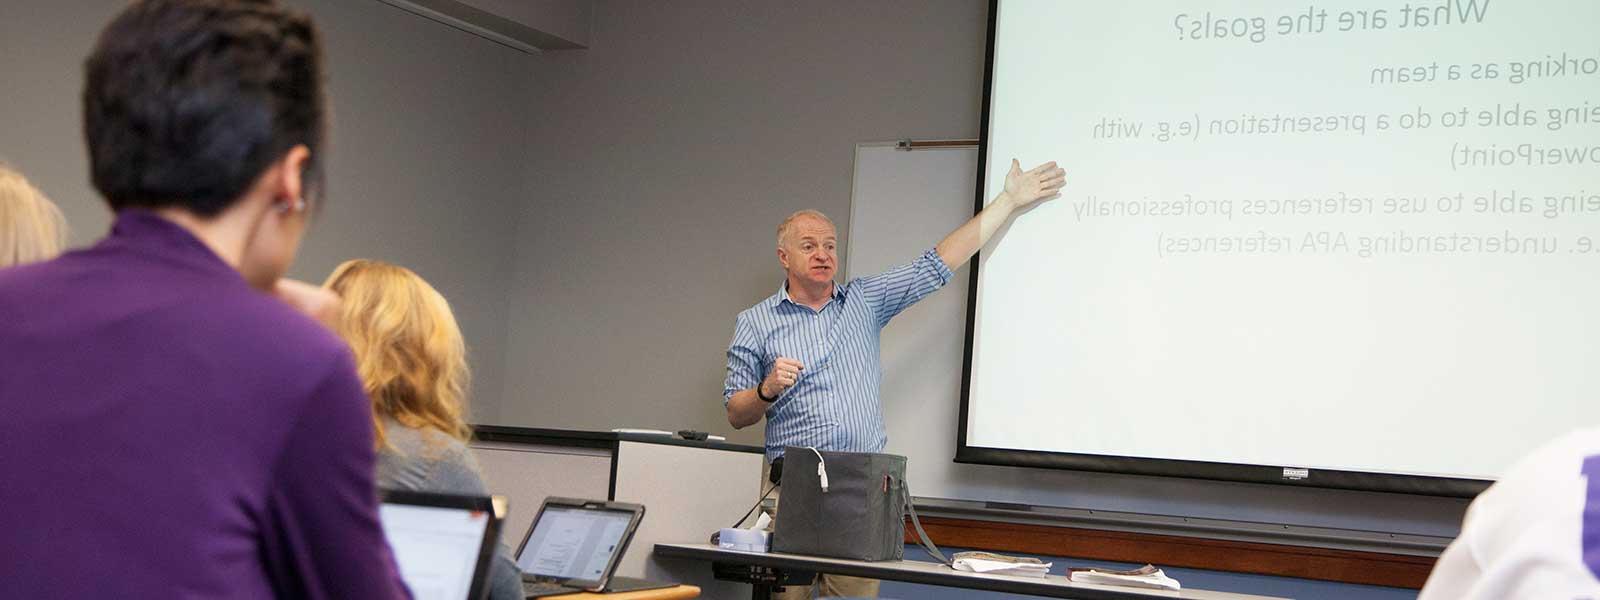 sociology professor gives class lecture while students take notes on laptops